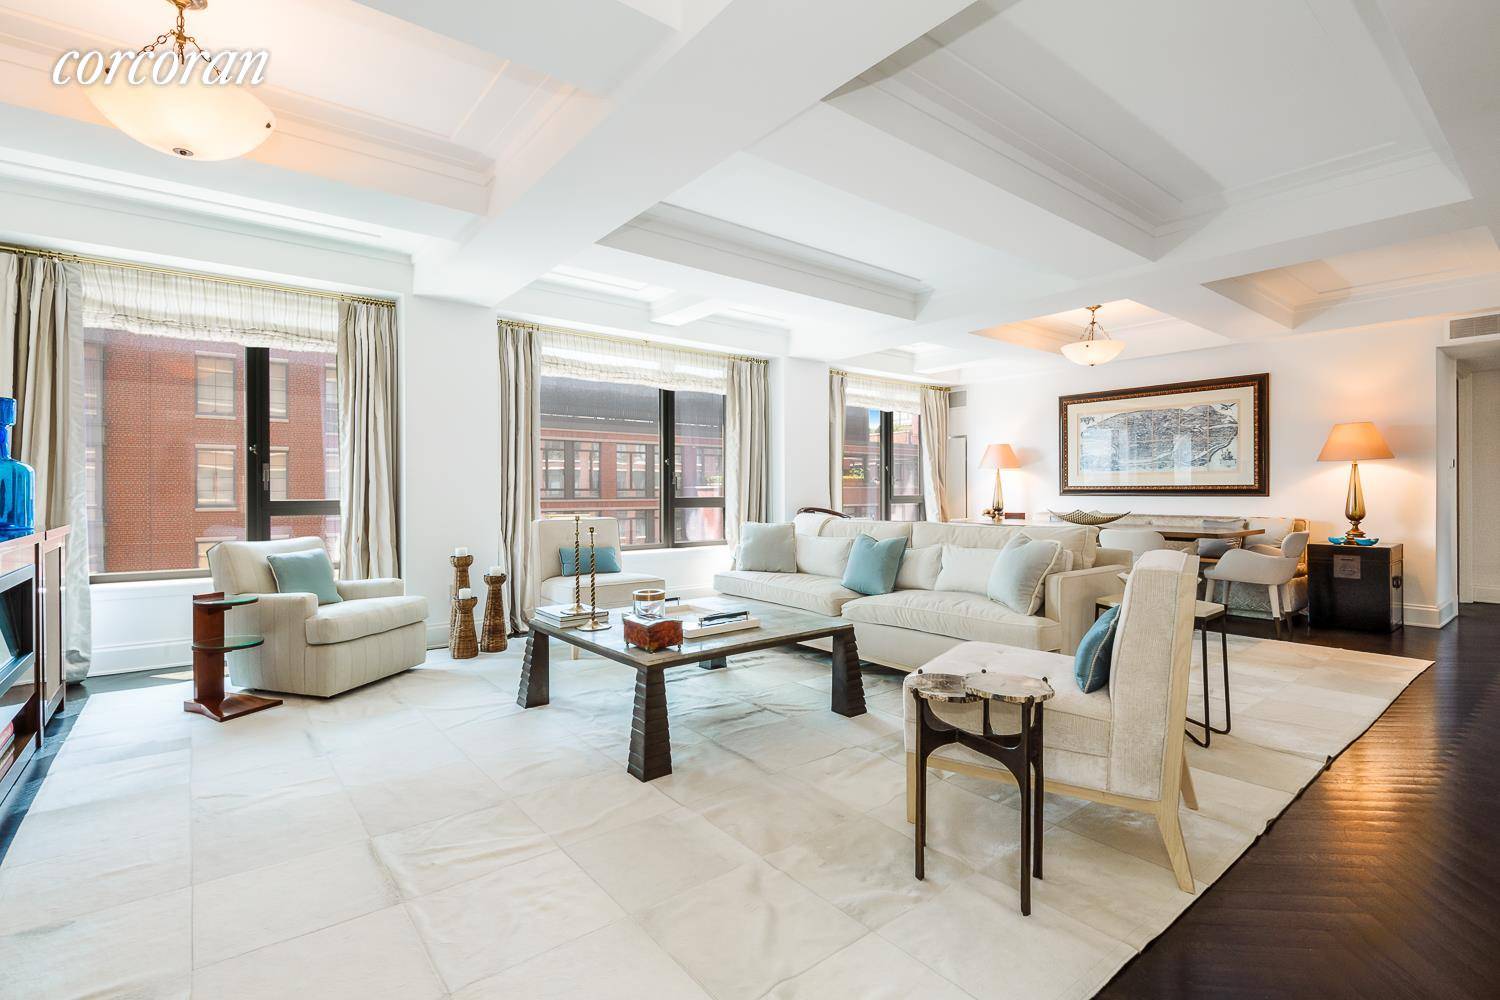 Situated mid block on one of the Village's prettiest tree lined townhouse blocks, west 12th street, this expansive and elegant interpretation of a classic prewar three bedroom residence spans 2, ...